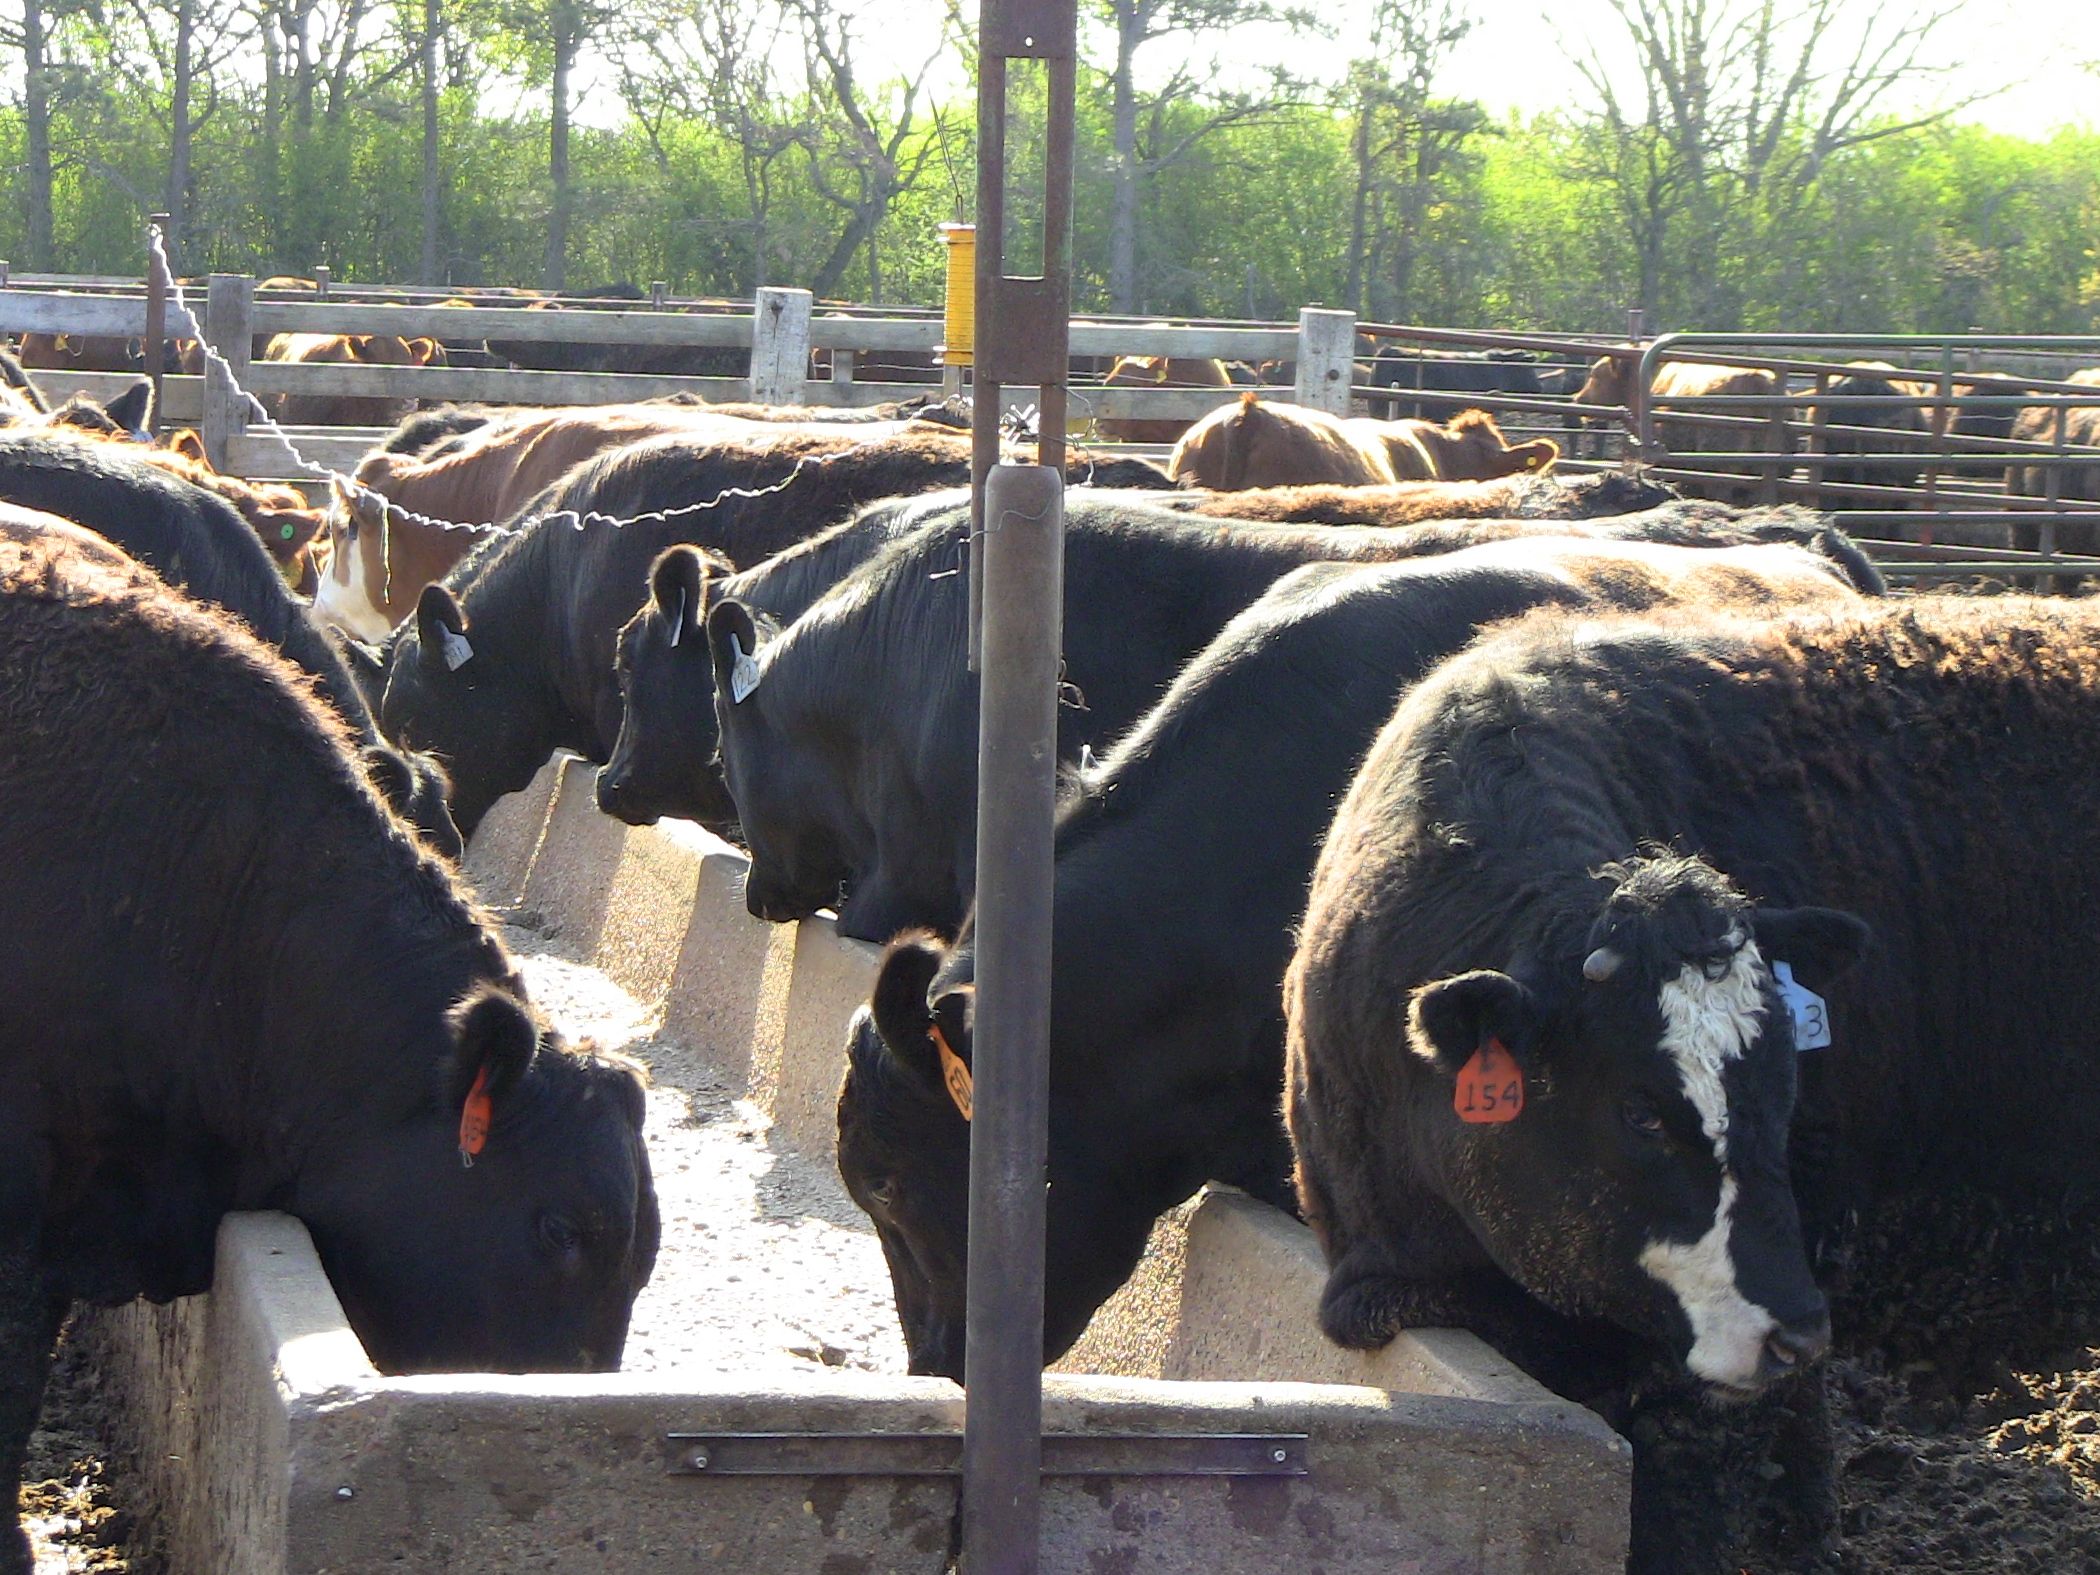 cattle feeding at a feed bunk